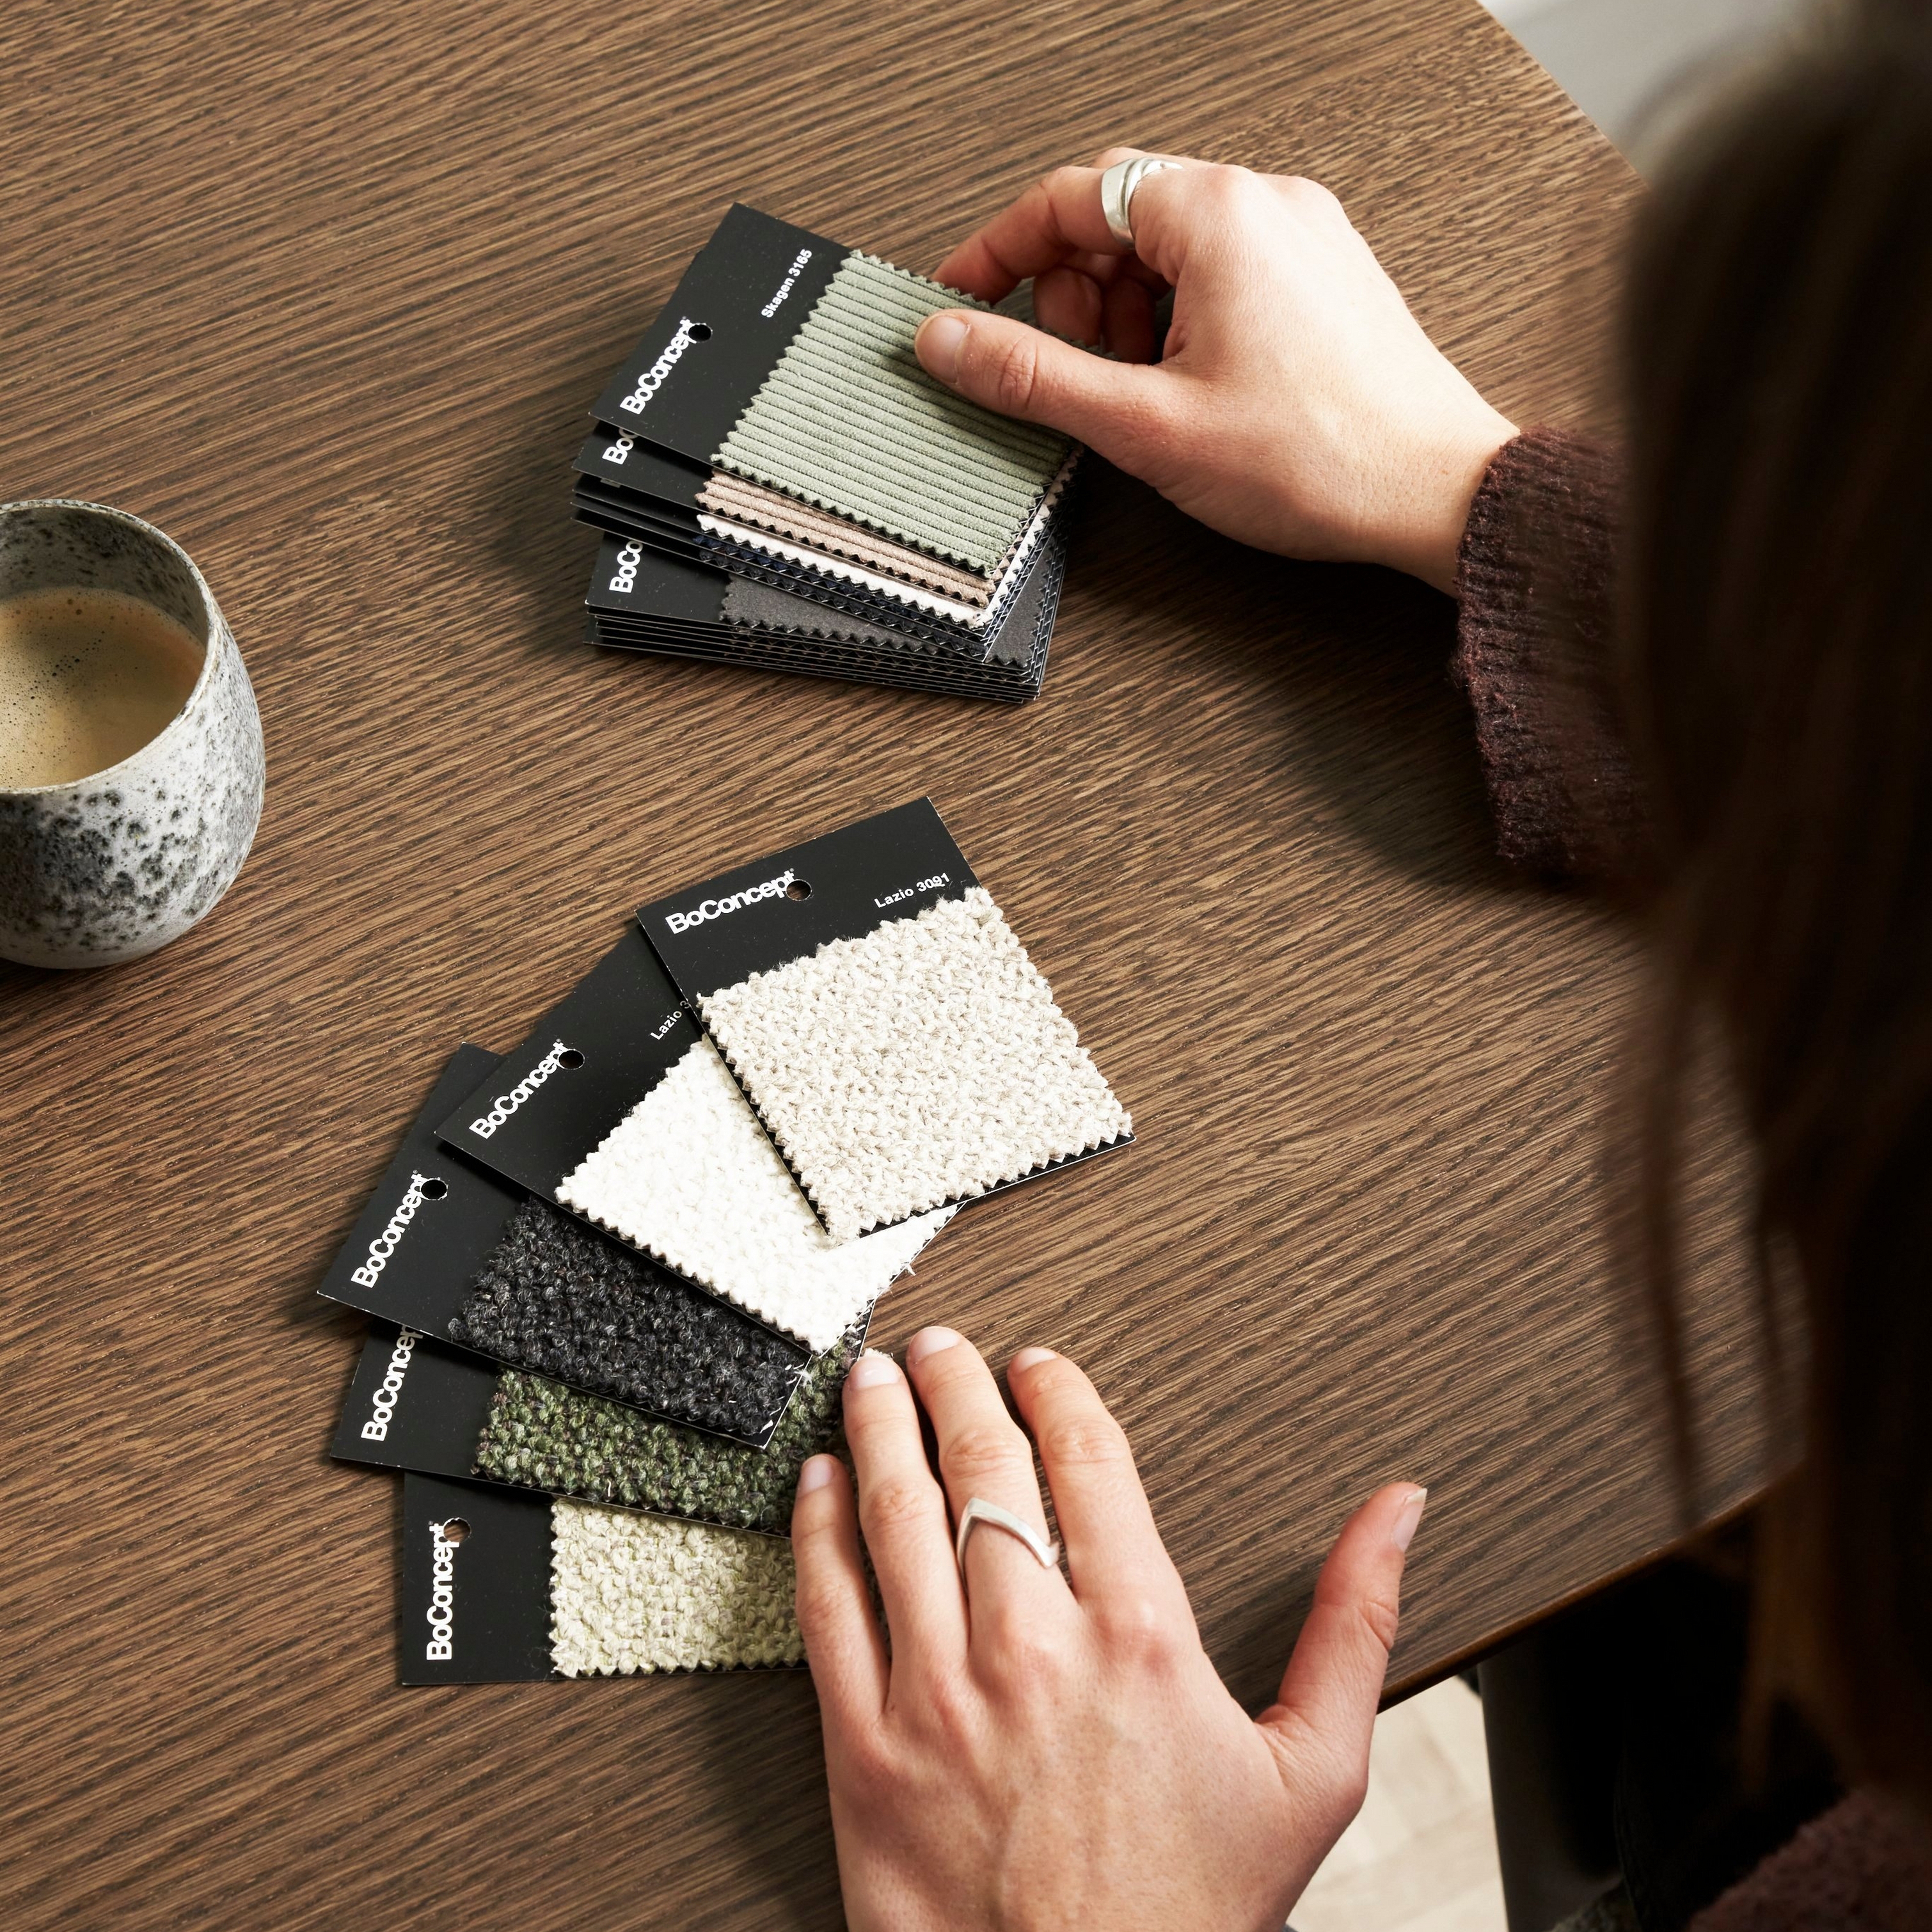 Person examining BoConcept fabric samples on a wooden table, next to a ceramic cup